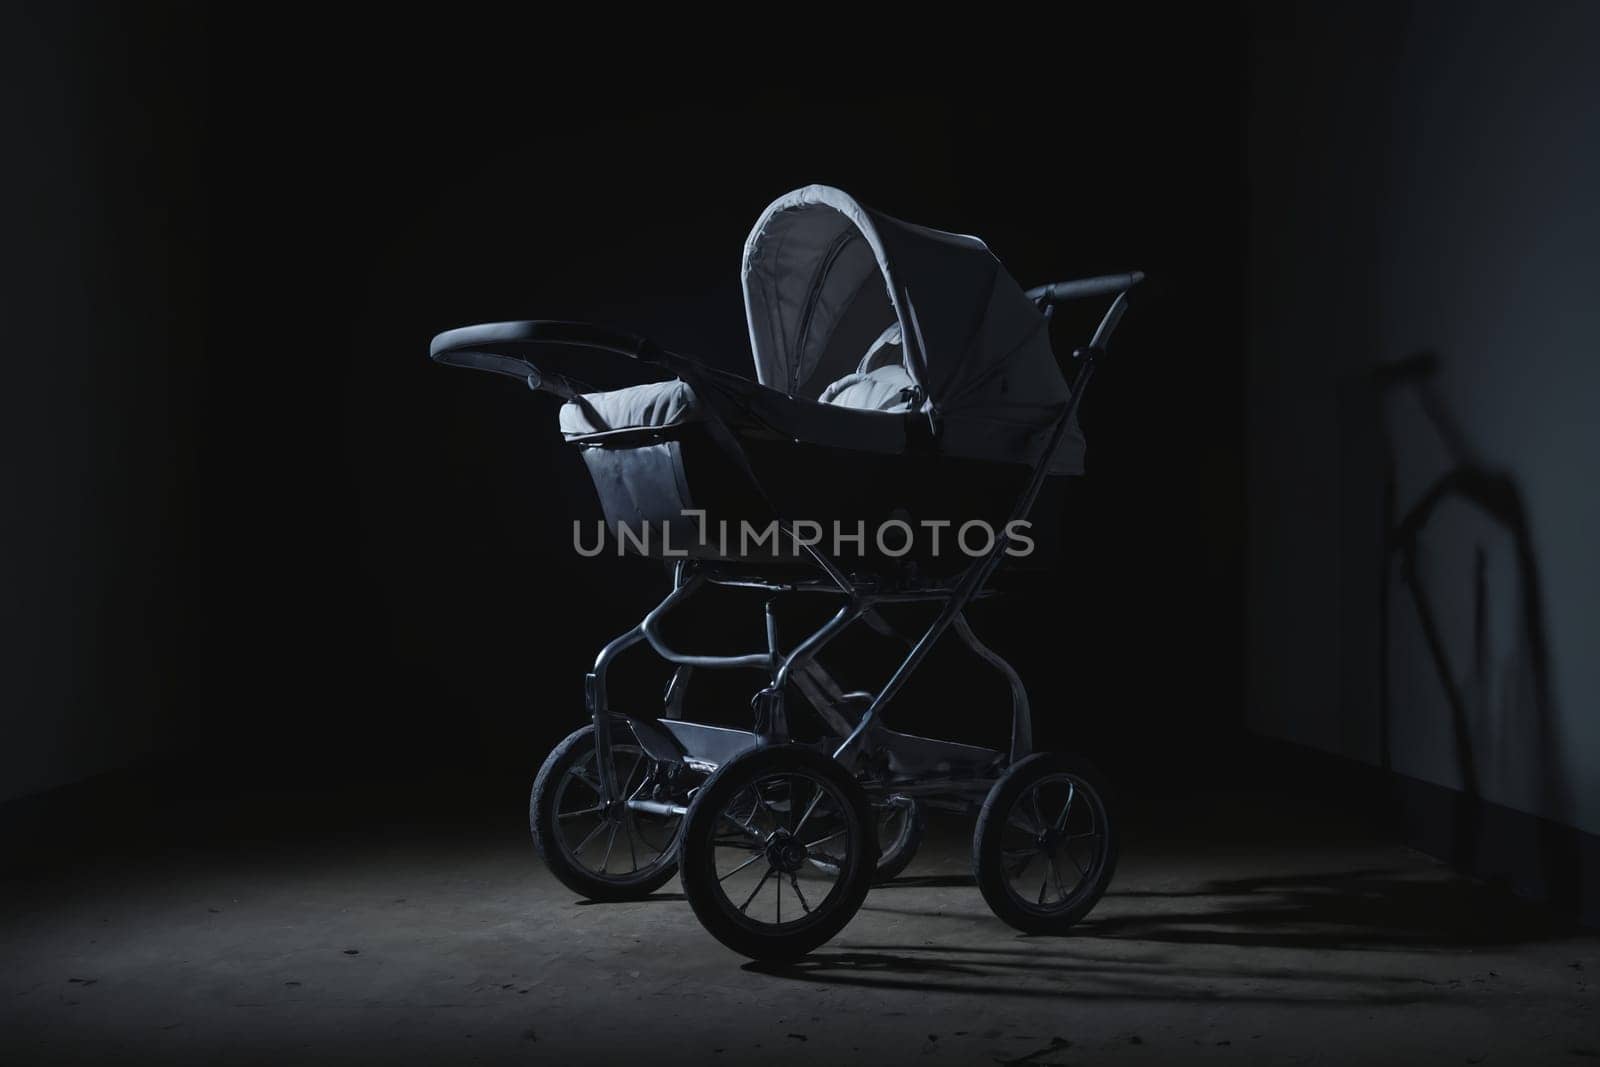 Bathed in a spotlight's cold gleam against an otherwise empty wall, stands an antique baby stroller. This black and white image captures the eerie loneliness and nostalgic overtones imprinted in its silhouette and the surrounding quiet.